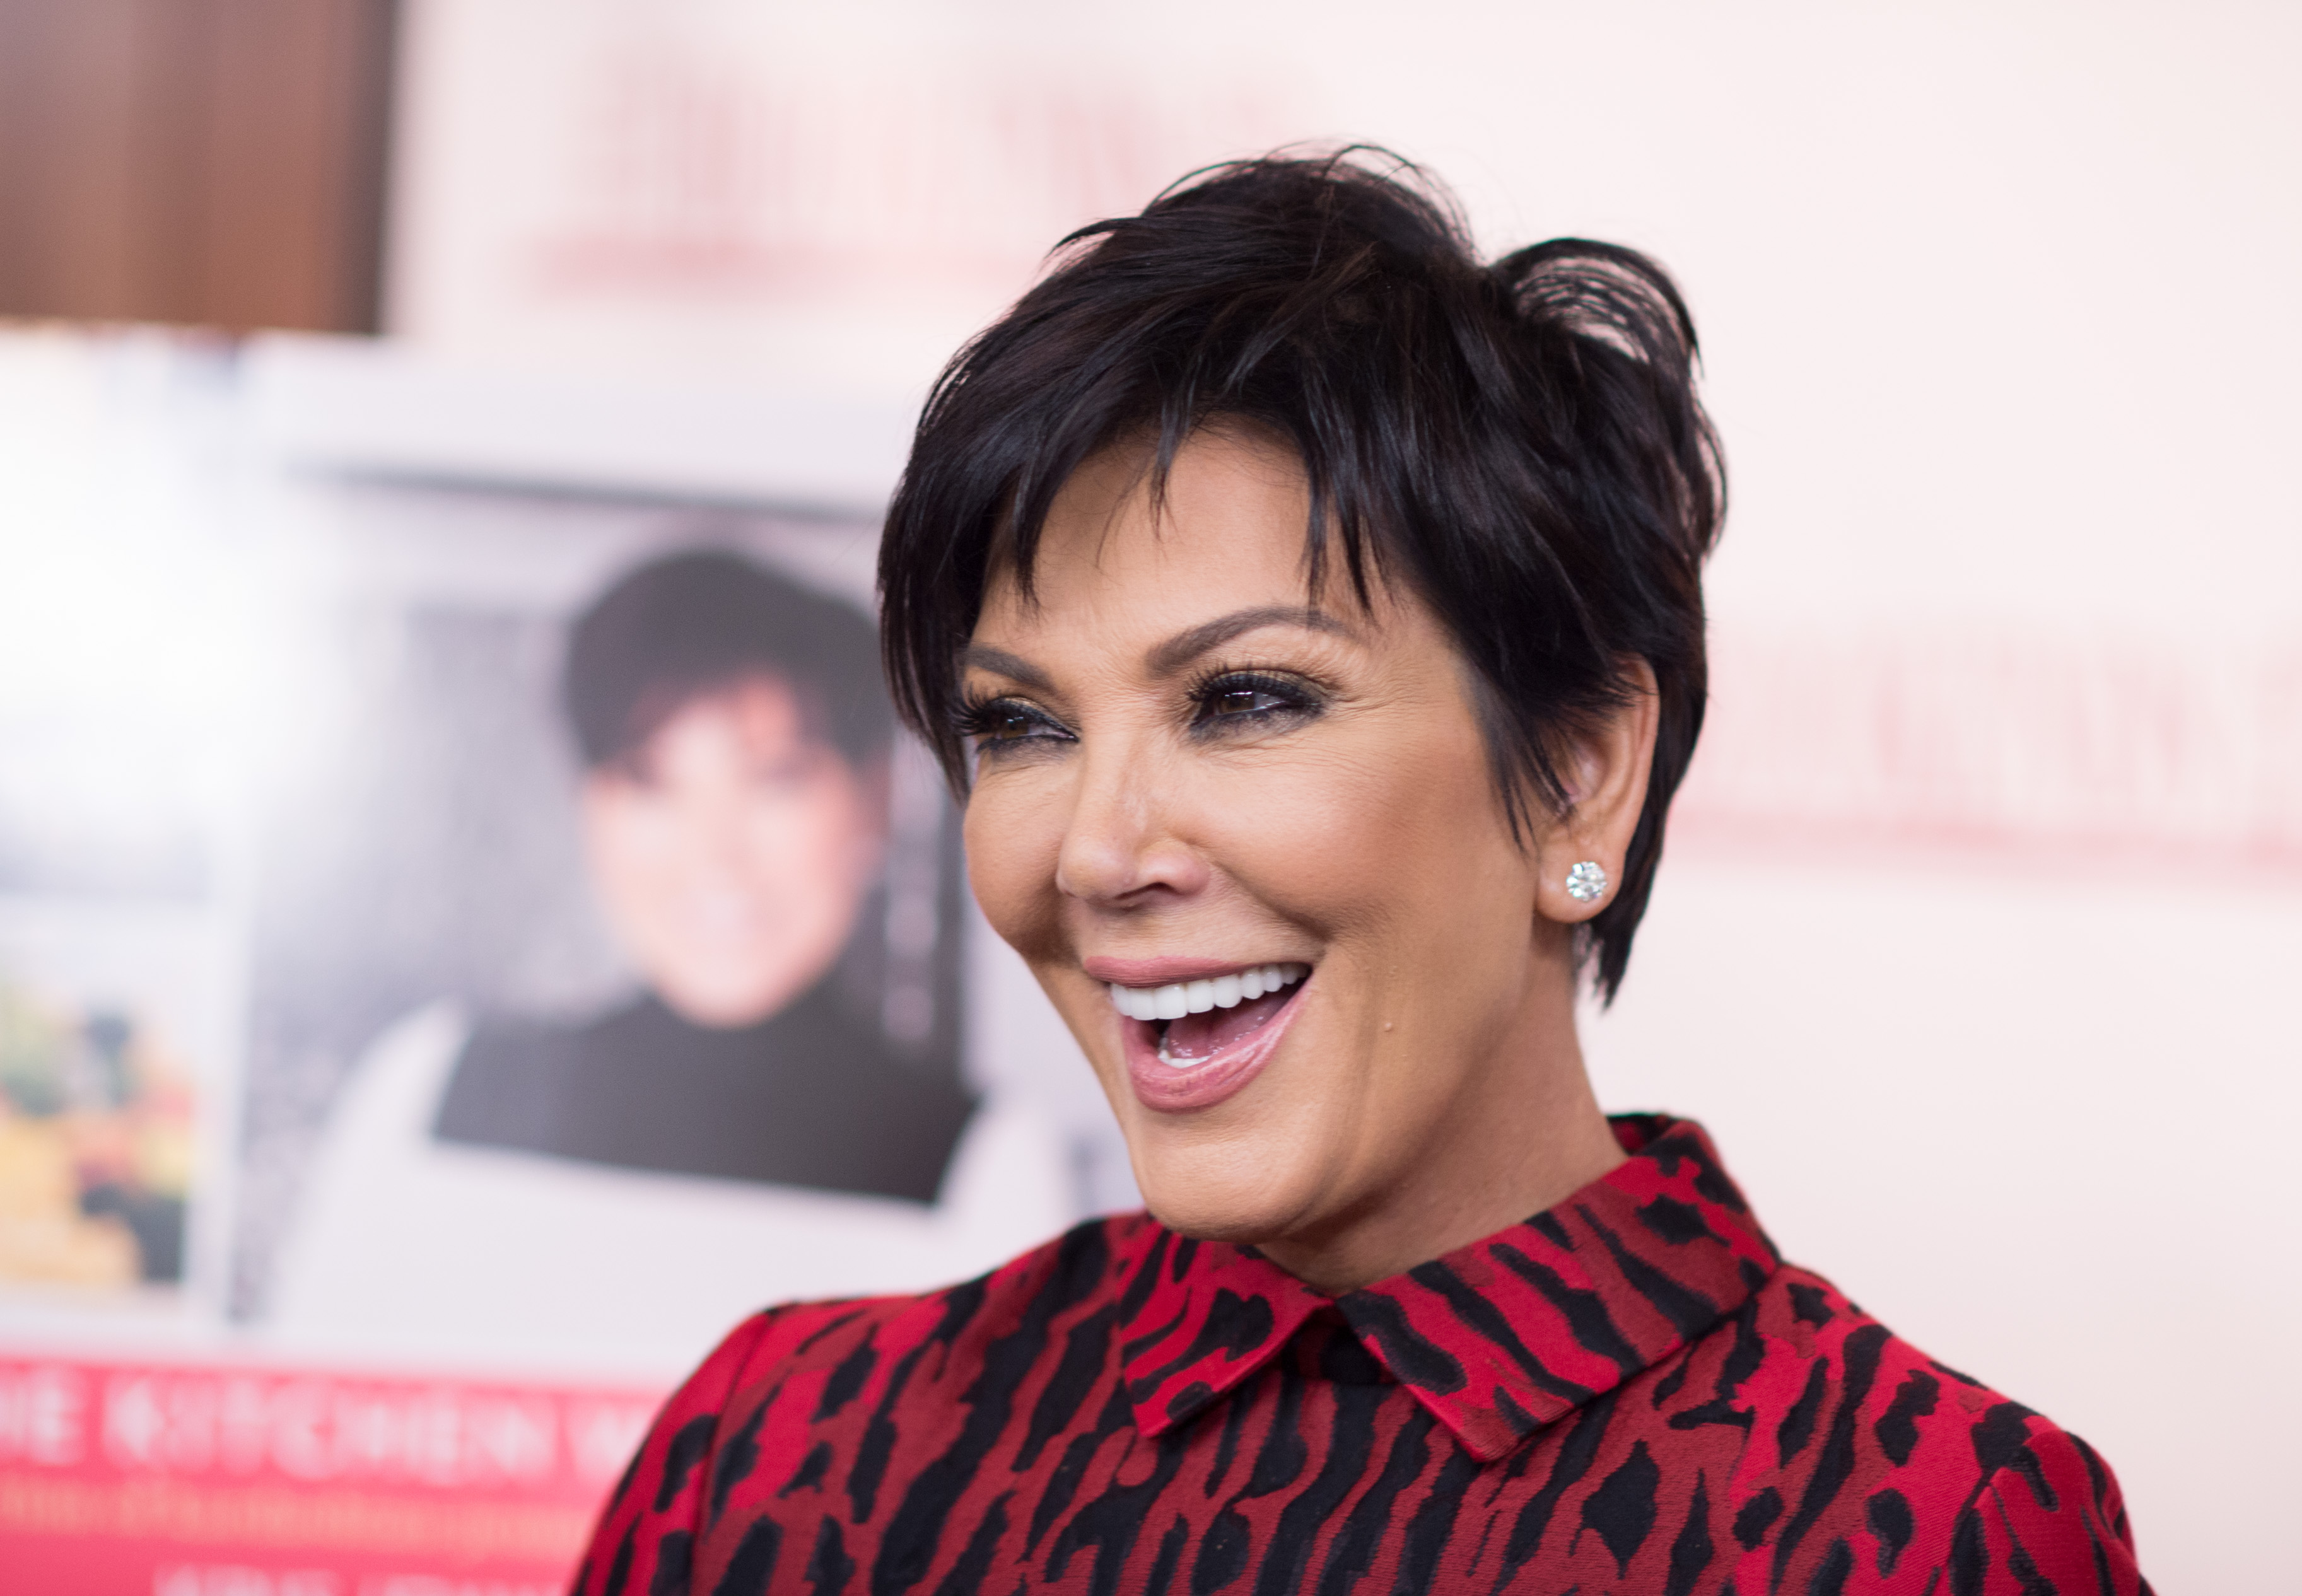 Kris Jenner attends a signing for her book "In the Kitchen With Kris" at Bookends Bookstore on Oct. 21, 2014 in Ridgewood, N.J. (Dave Kotinsky—Getty Images)